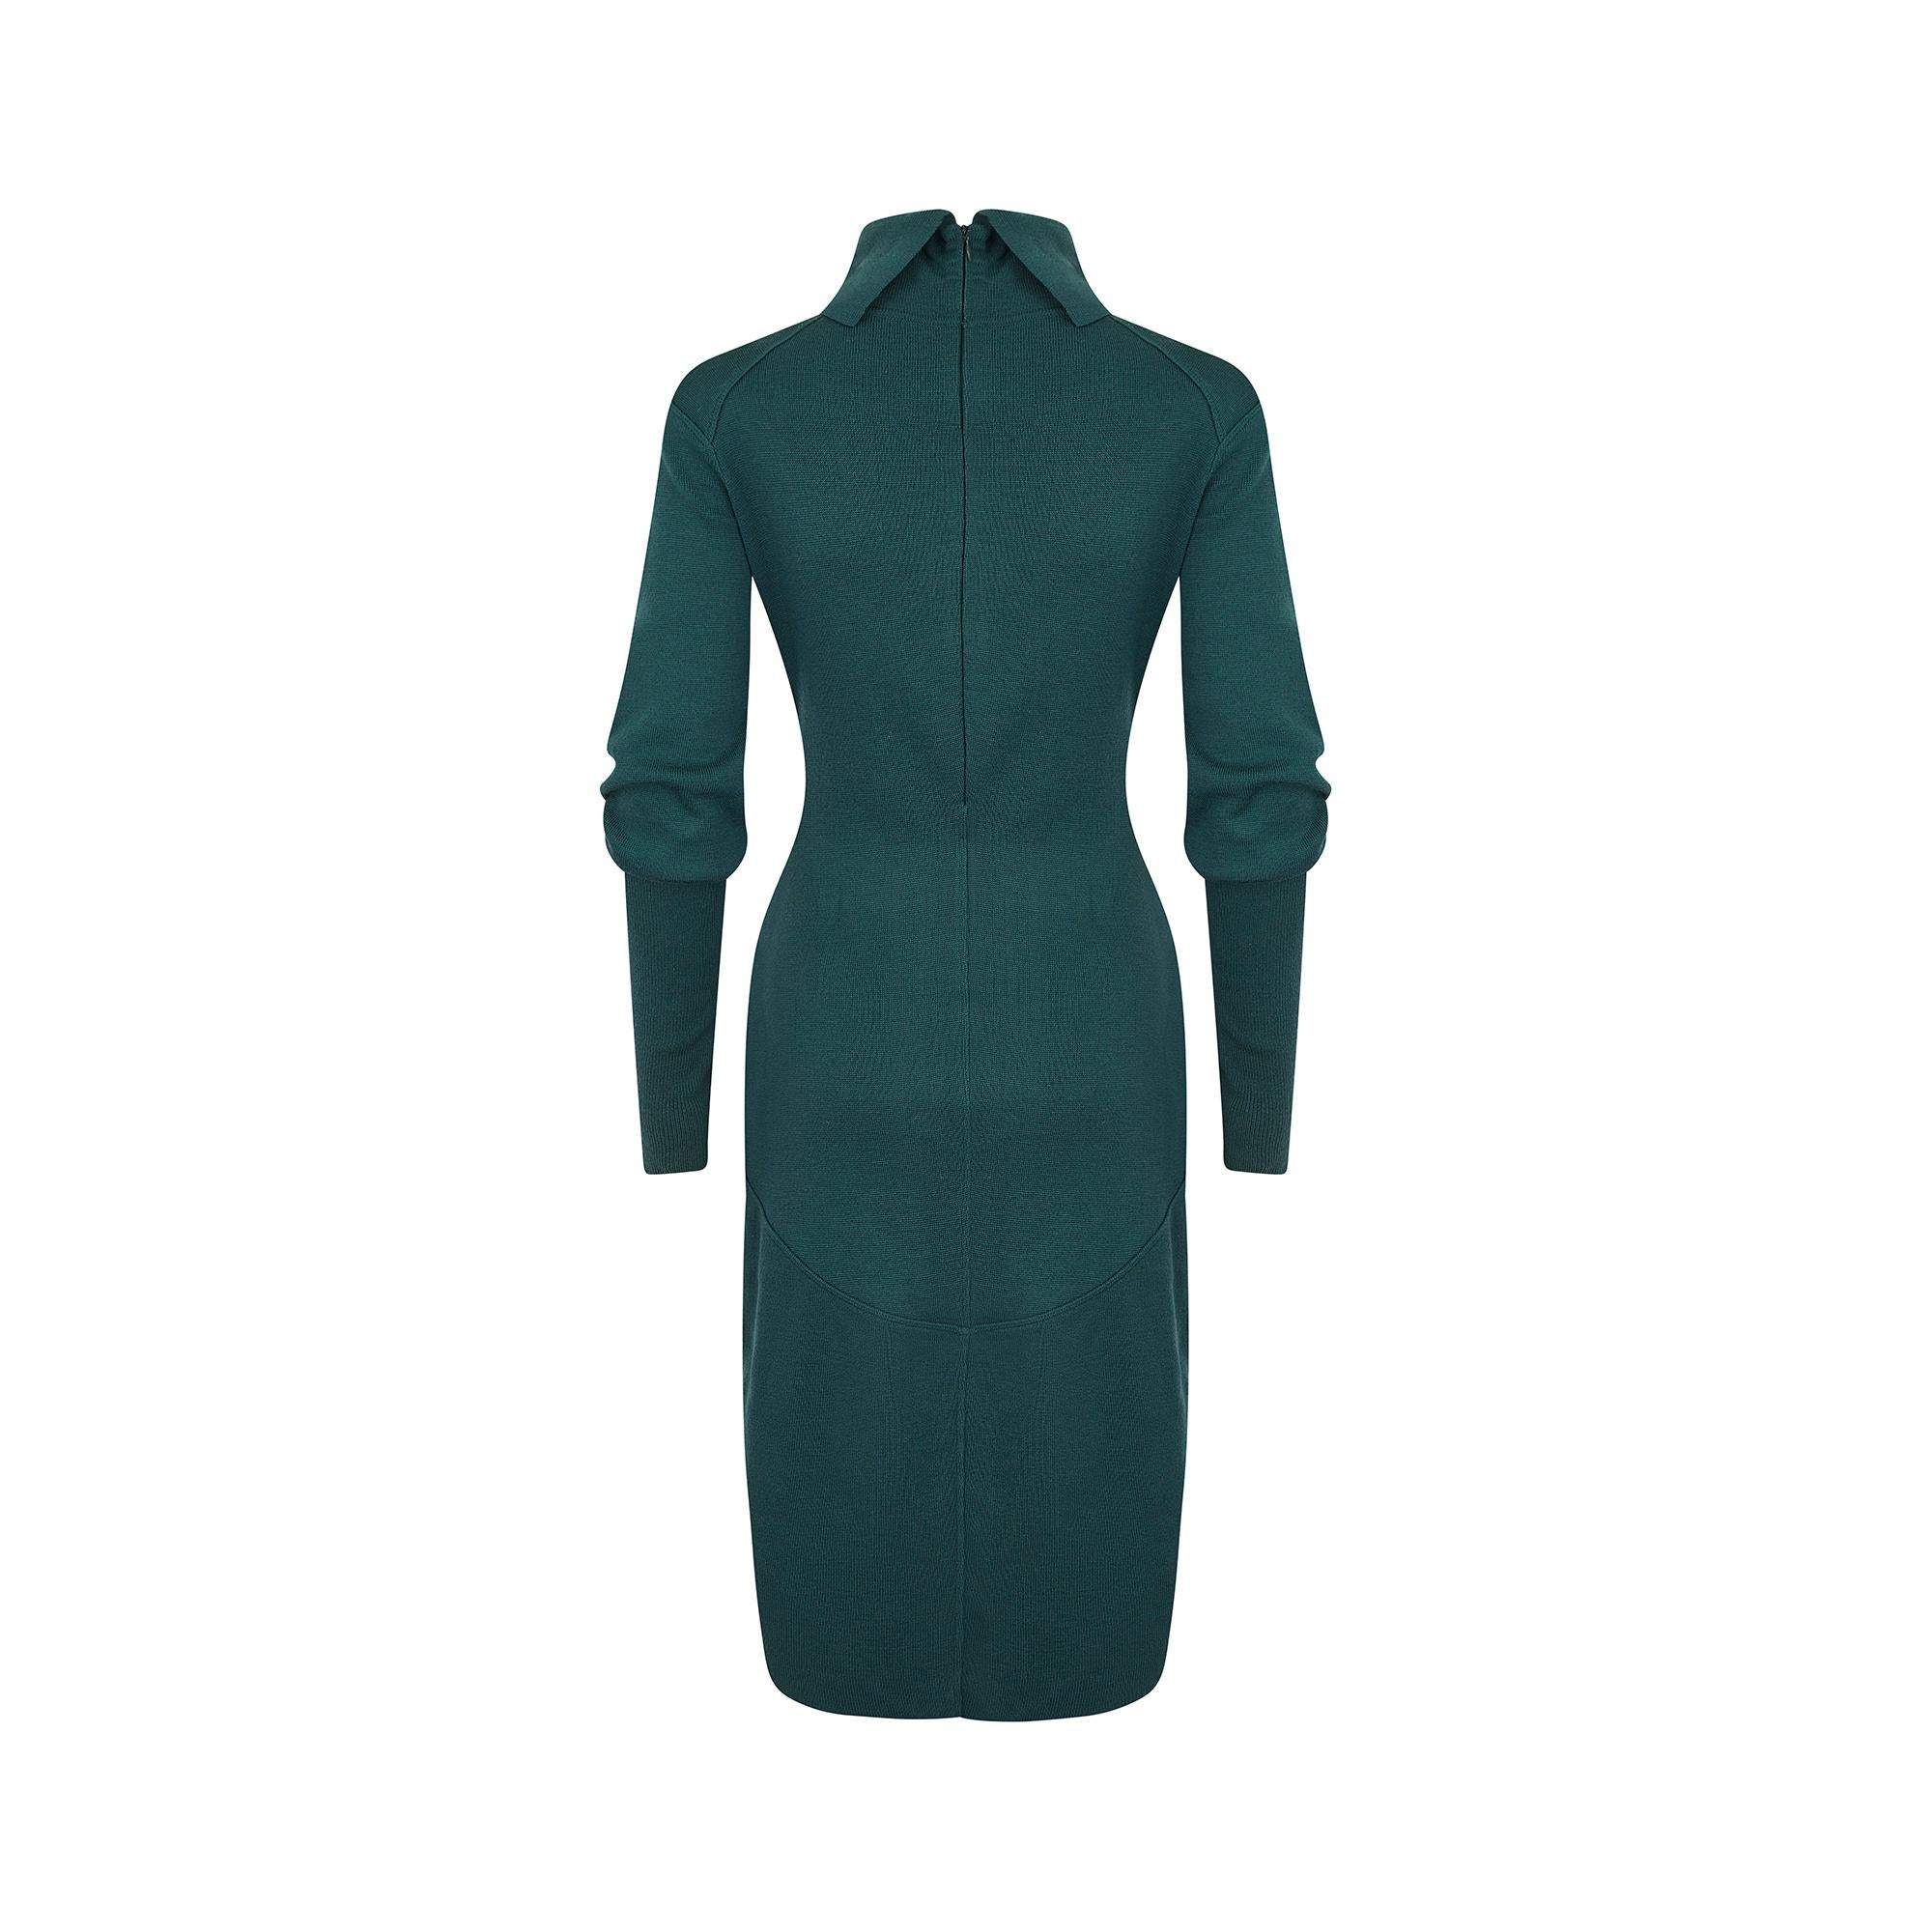 Women's 1980s Alaia Wool Teal Green Bodycon Dress For Sale